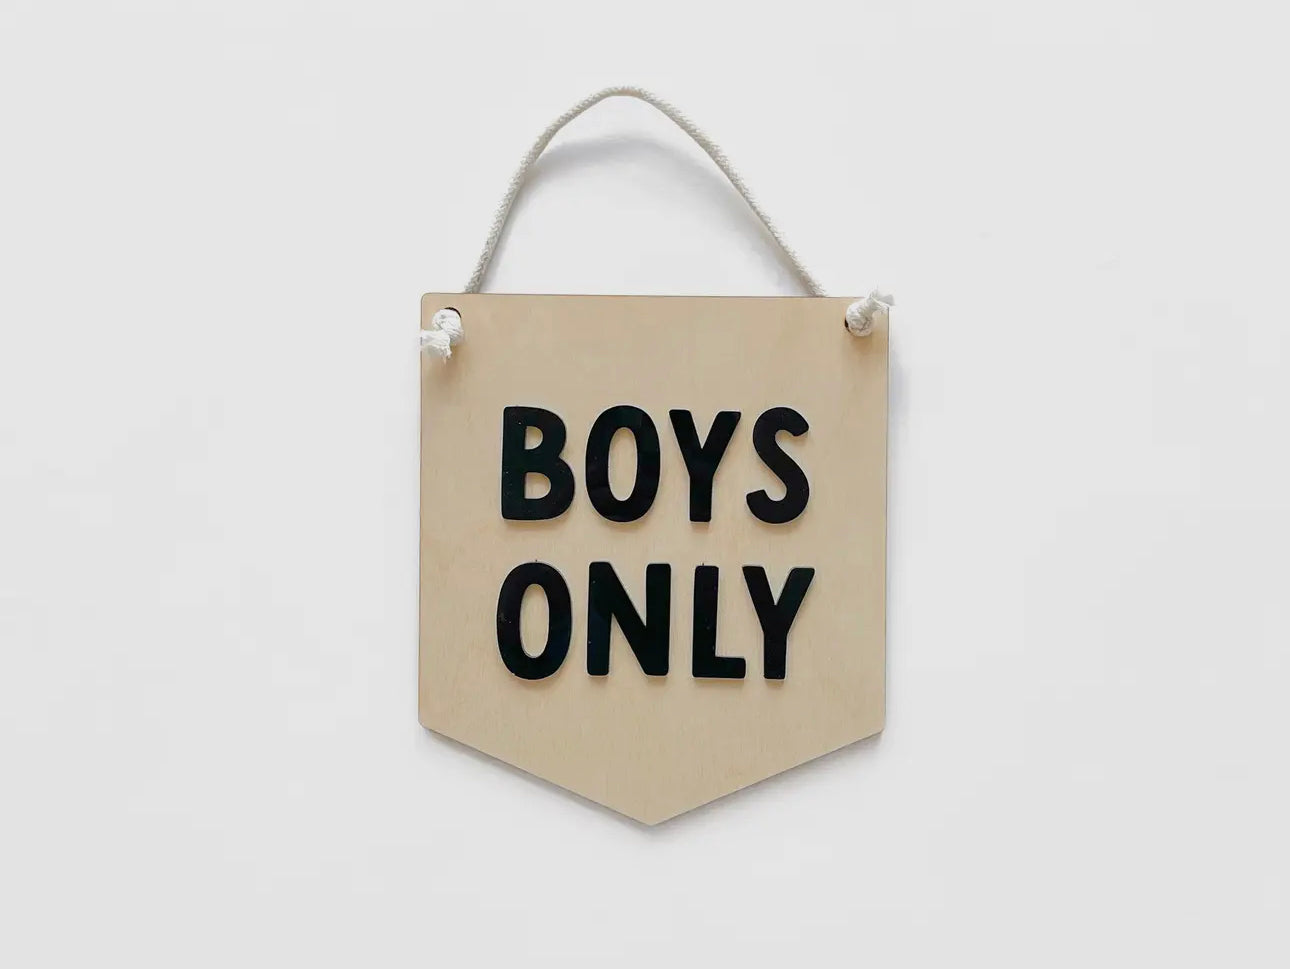 Boys only room sign